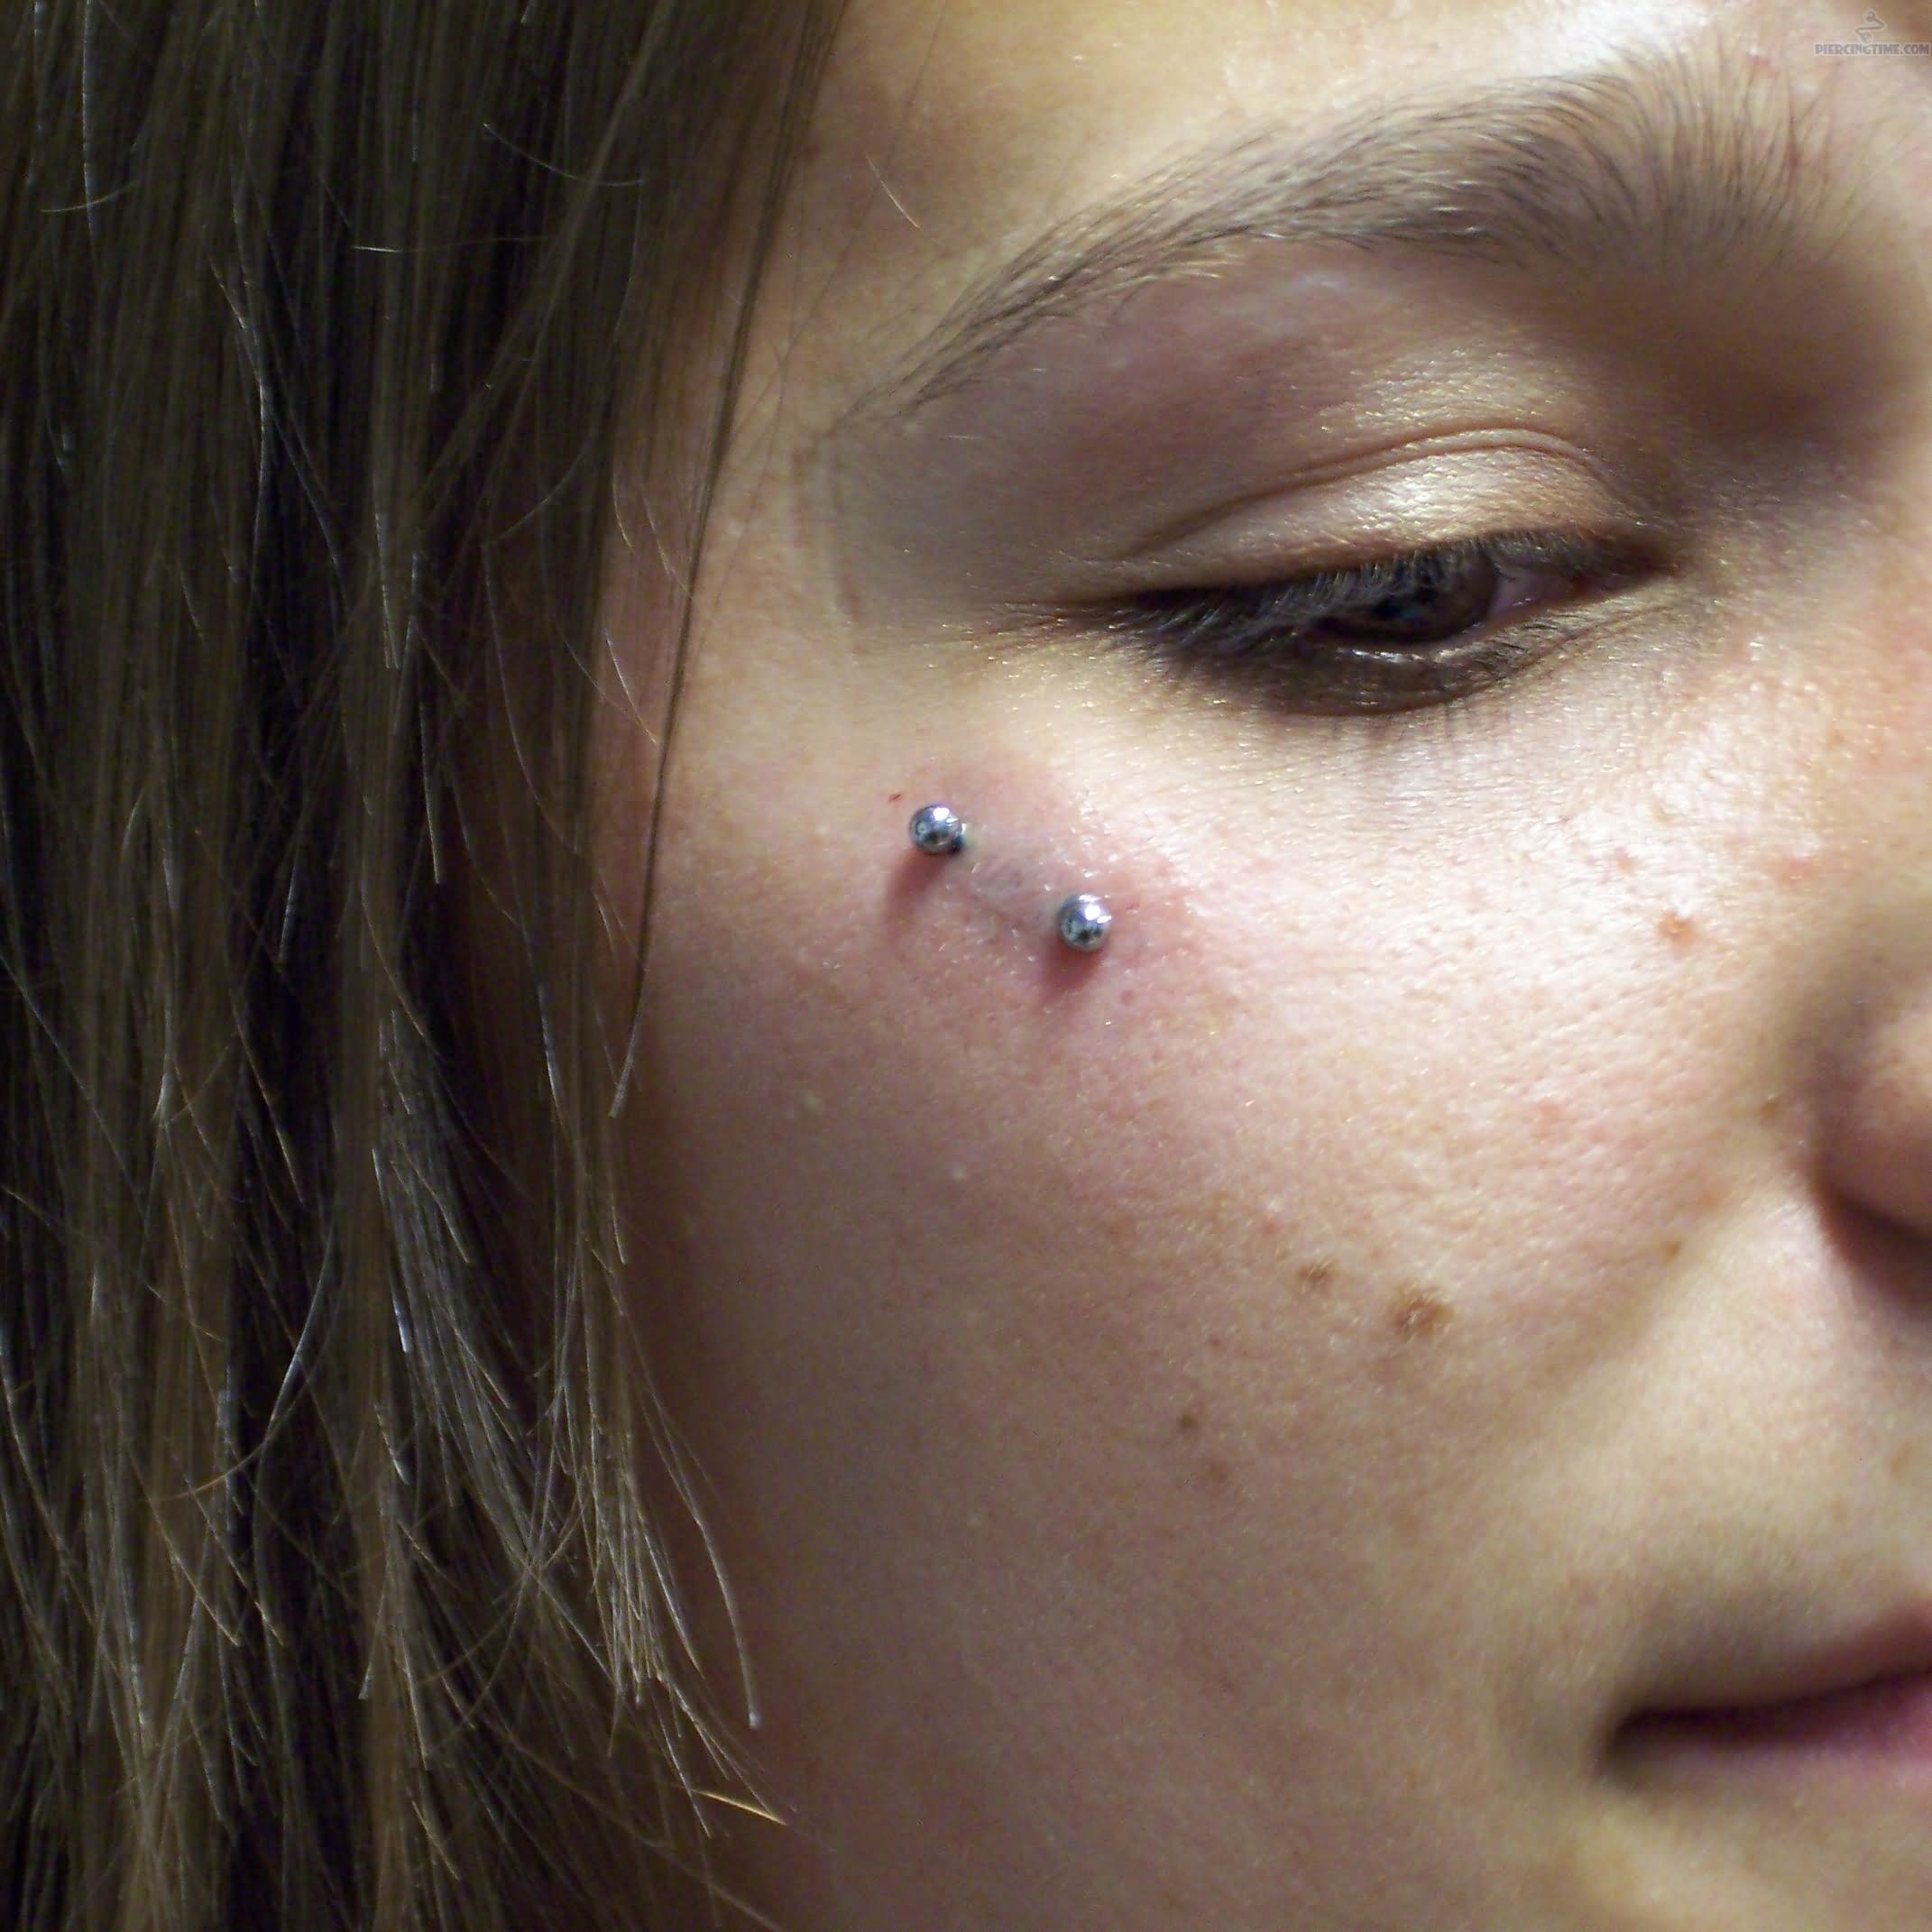 Small Surface Anti Eyebrow Piercing For Girls